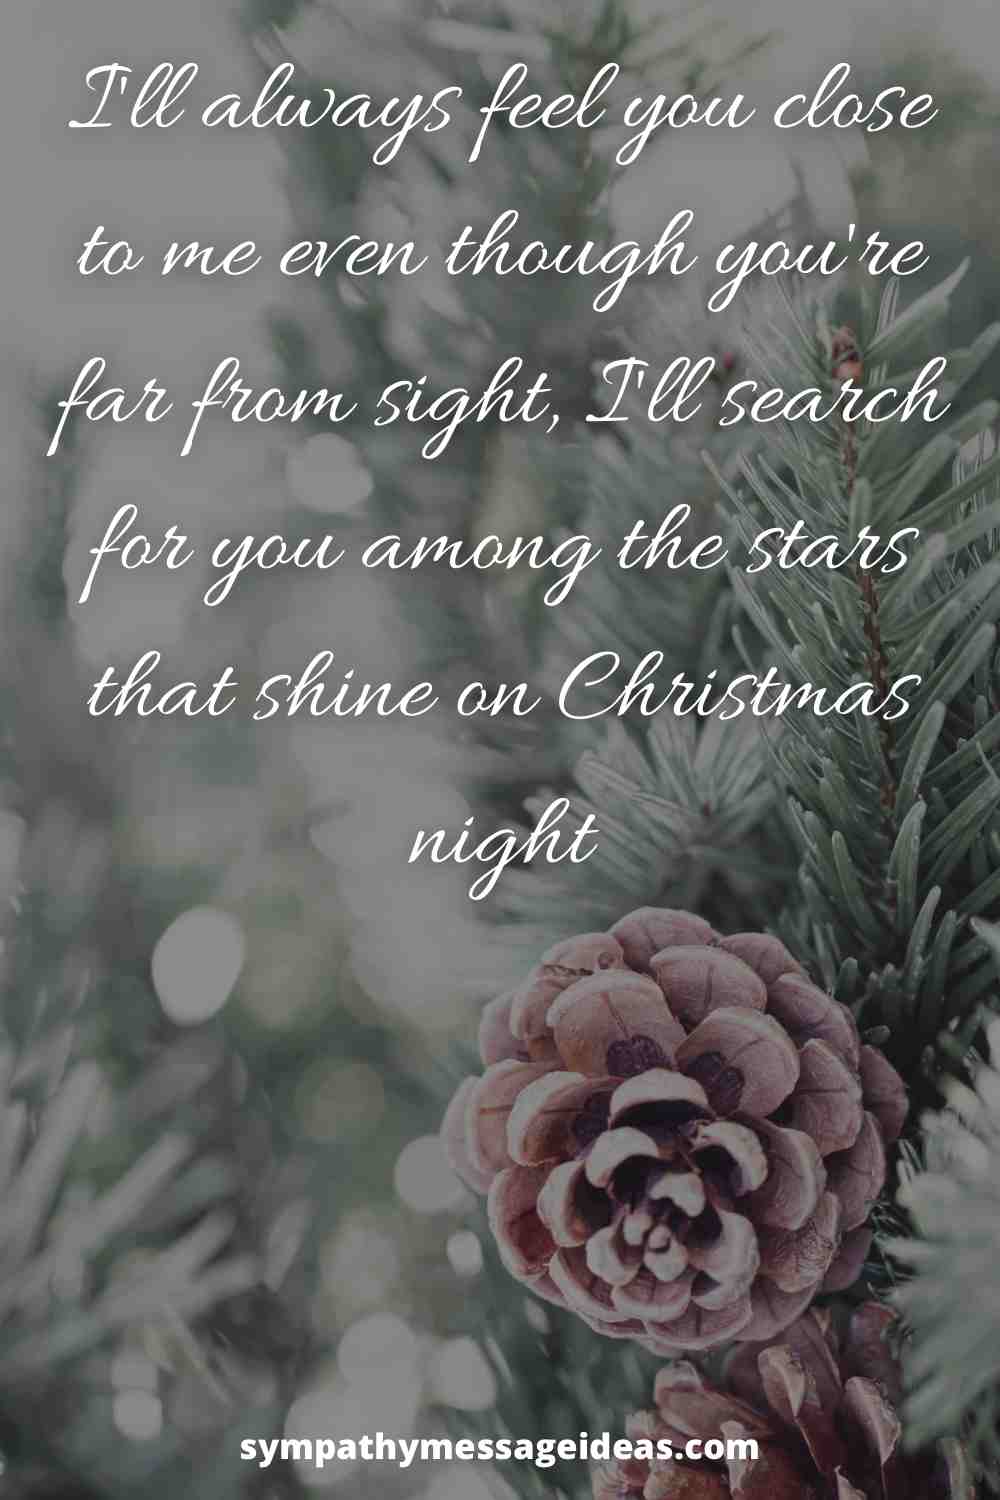 quote for remembering a loved one at christmas